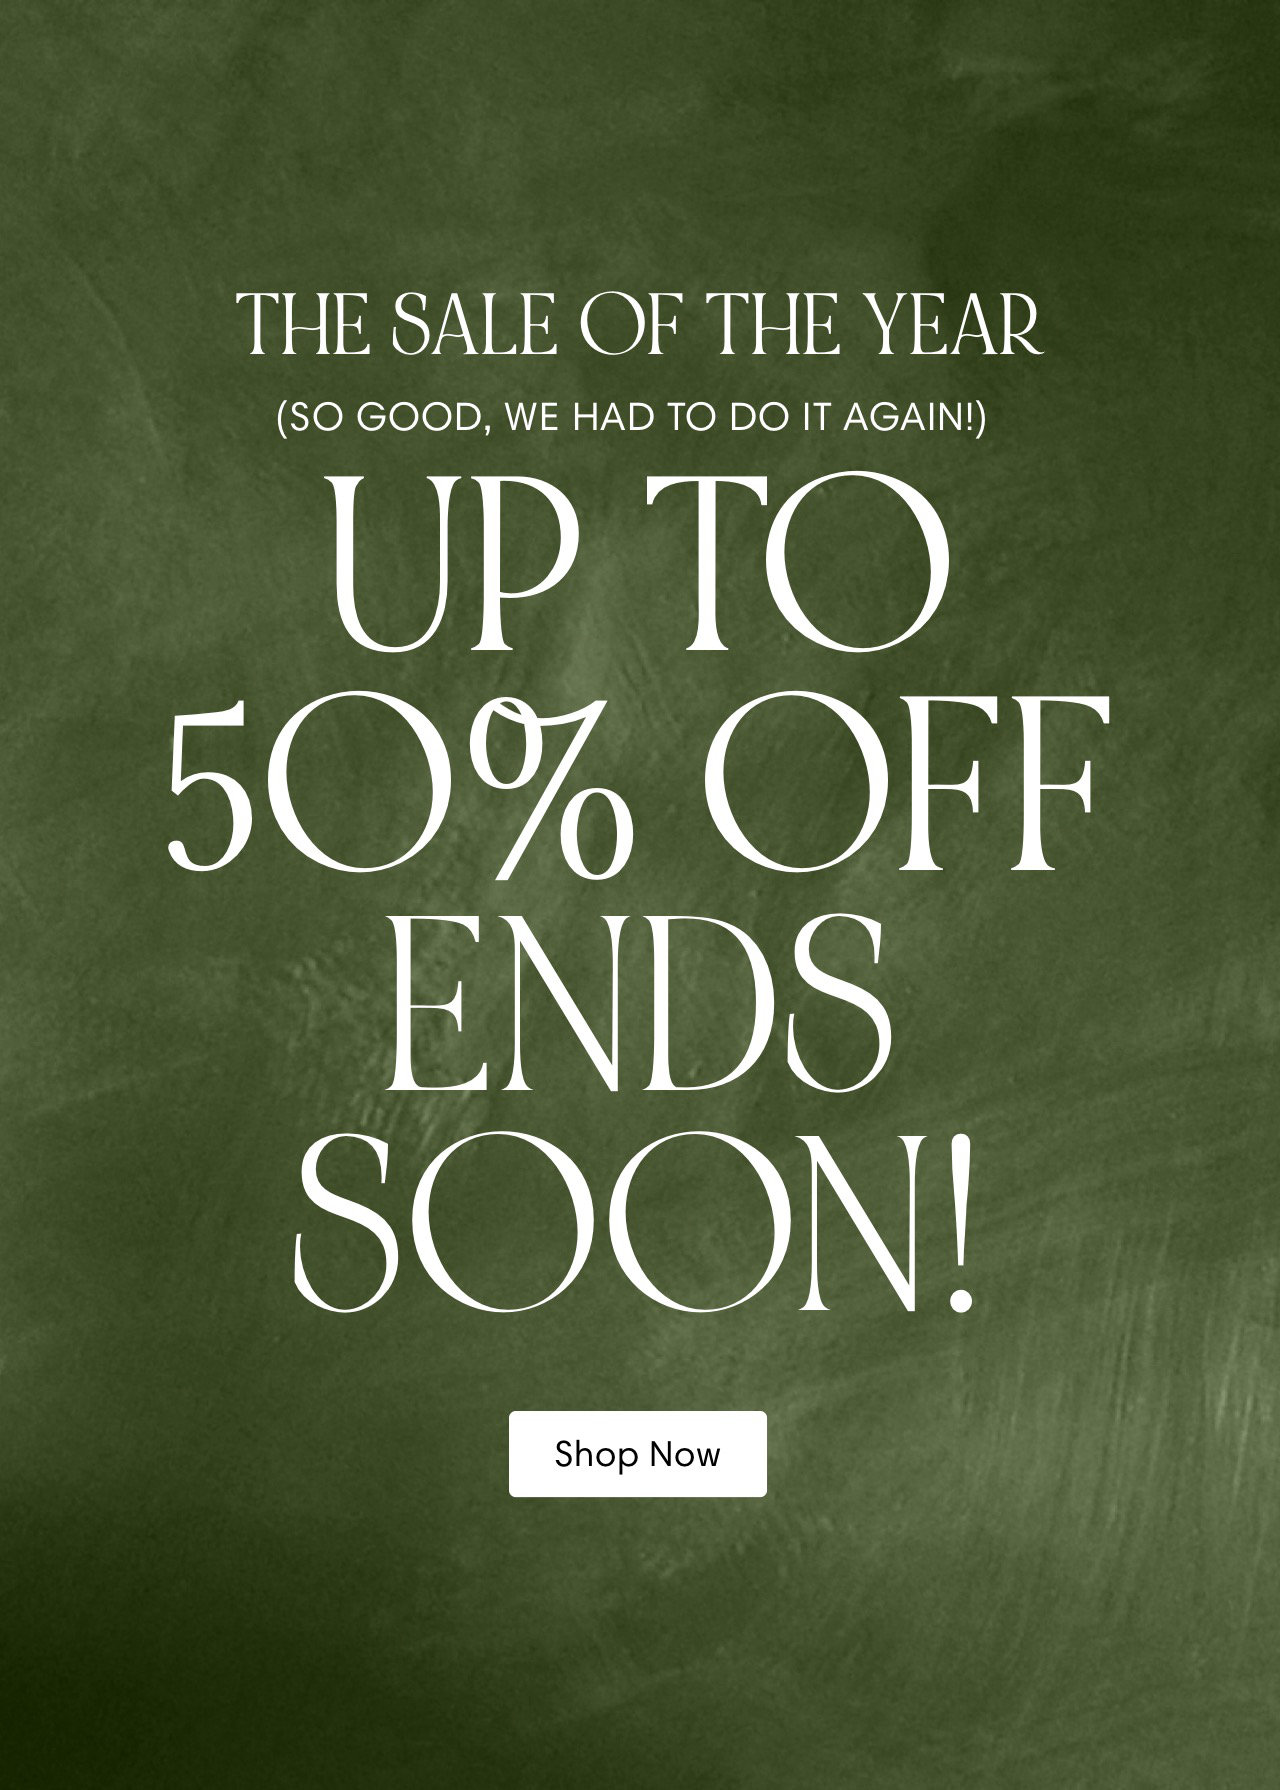 THE SALE OF THE YEAR UPTO 5%% OFF 